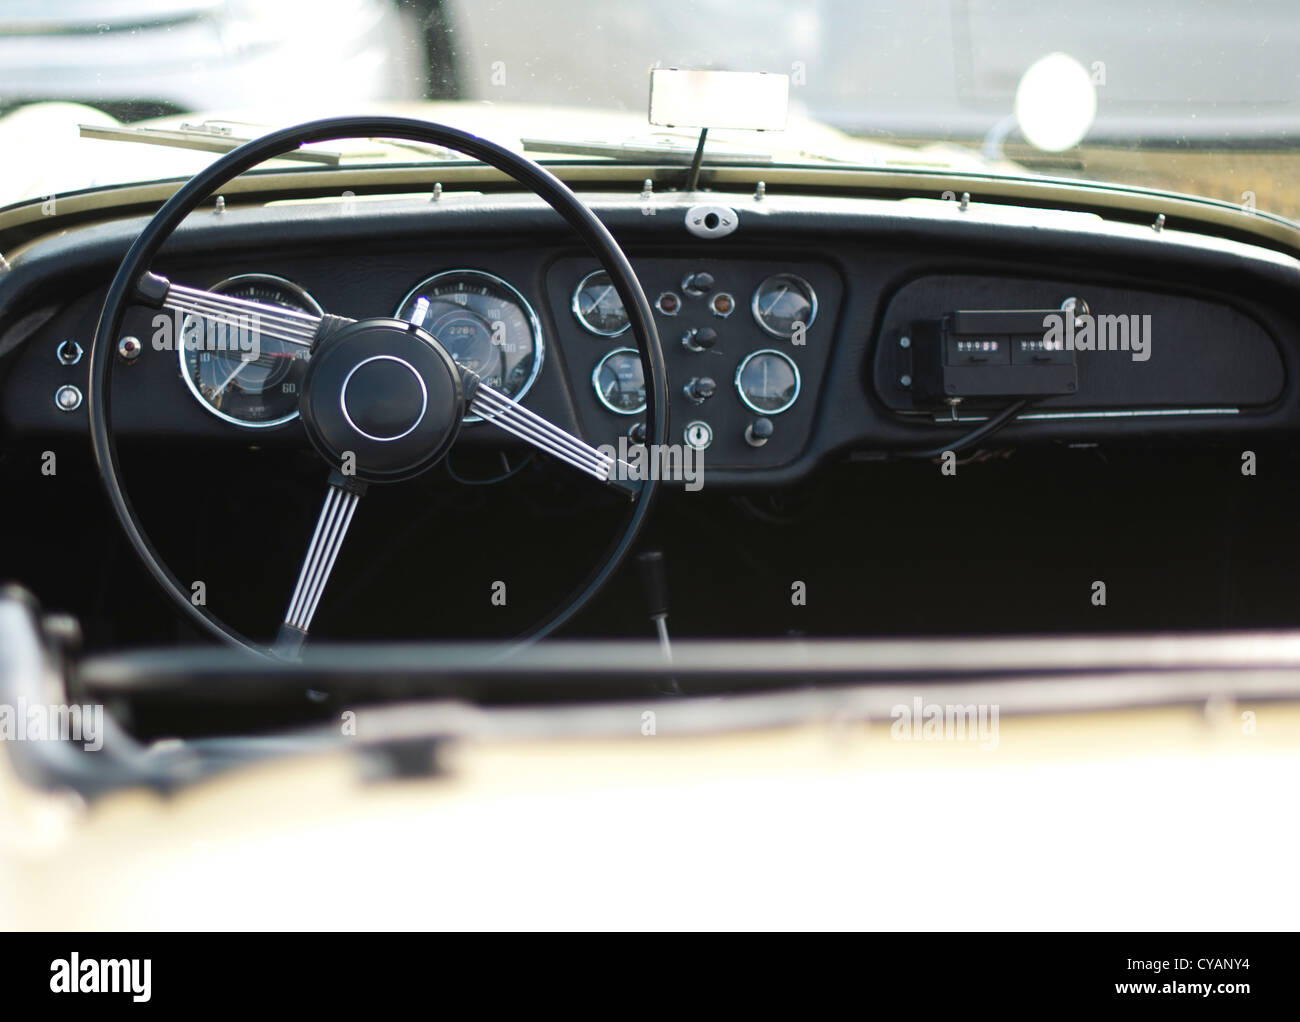 Steering wheel and dashboard of an old antique car. Stock Photo